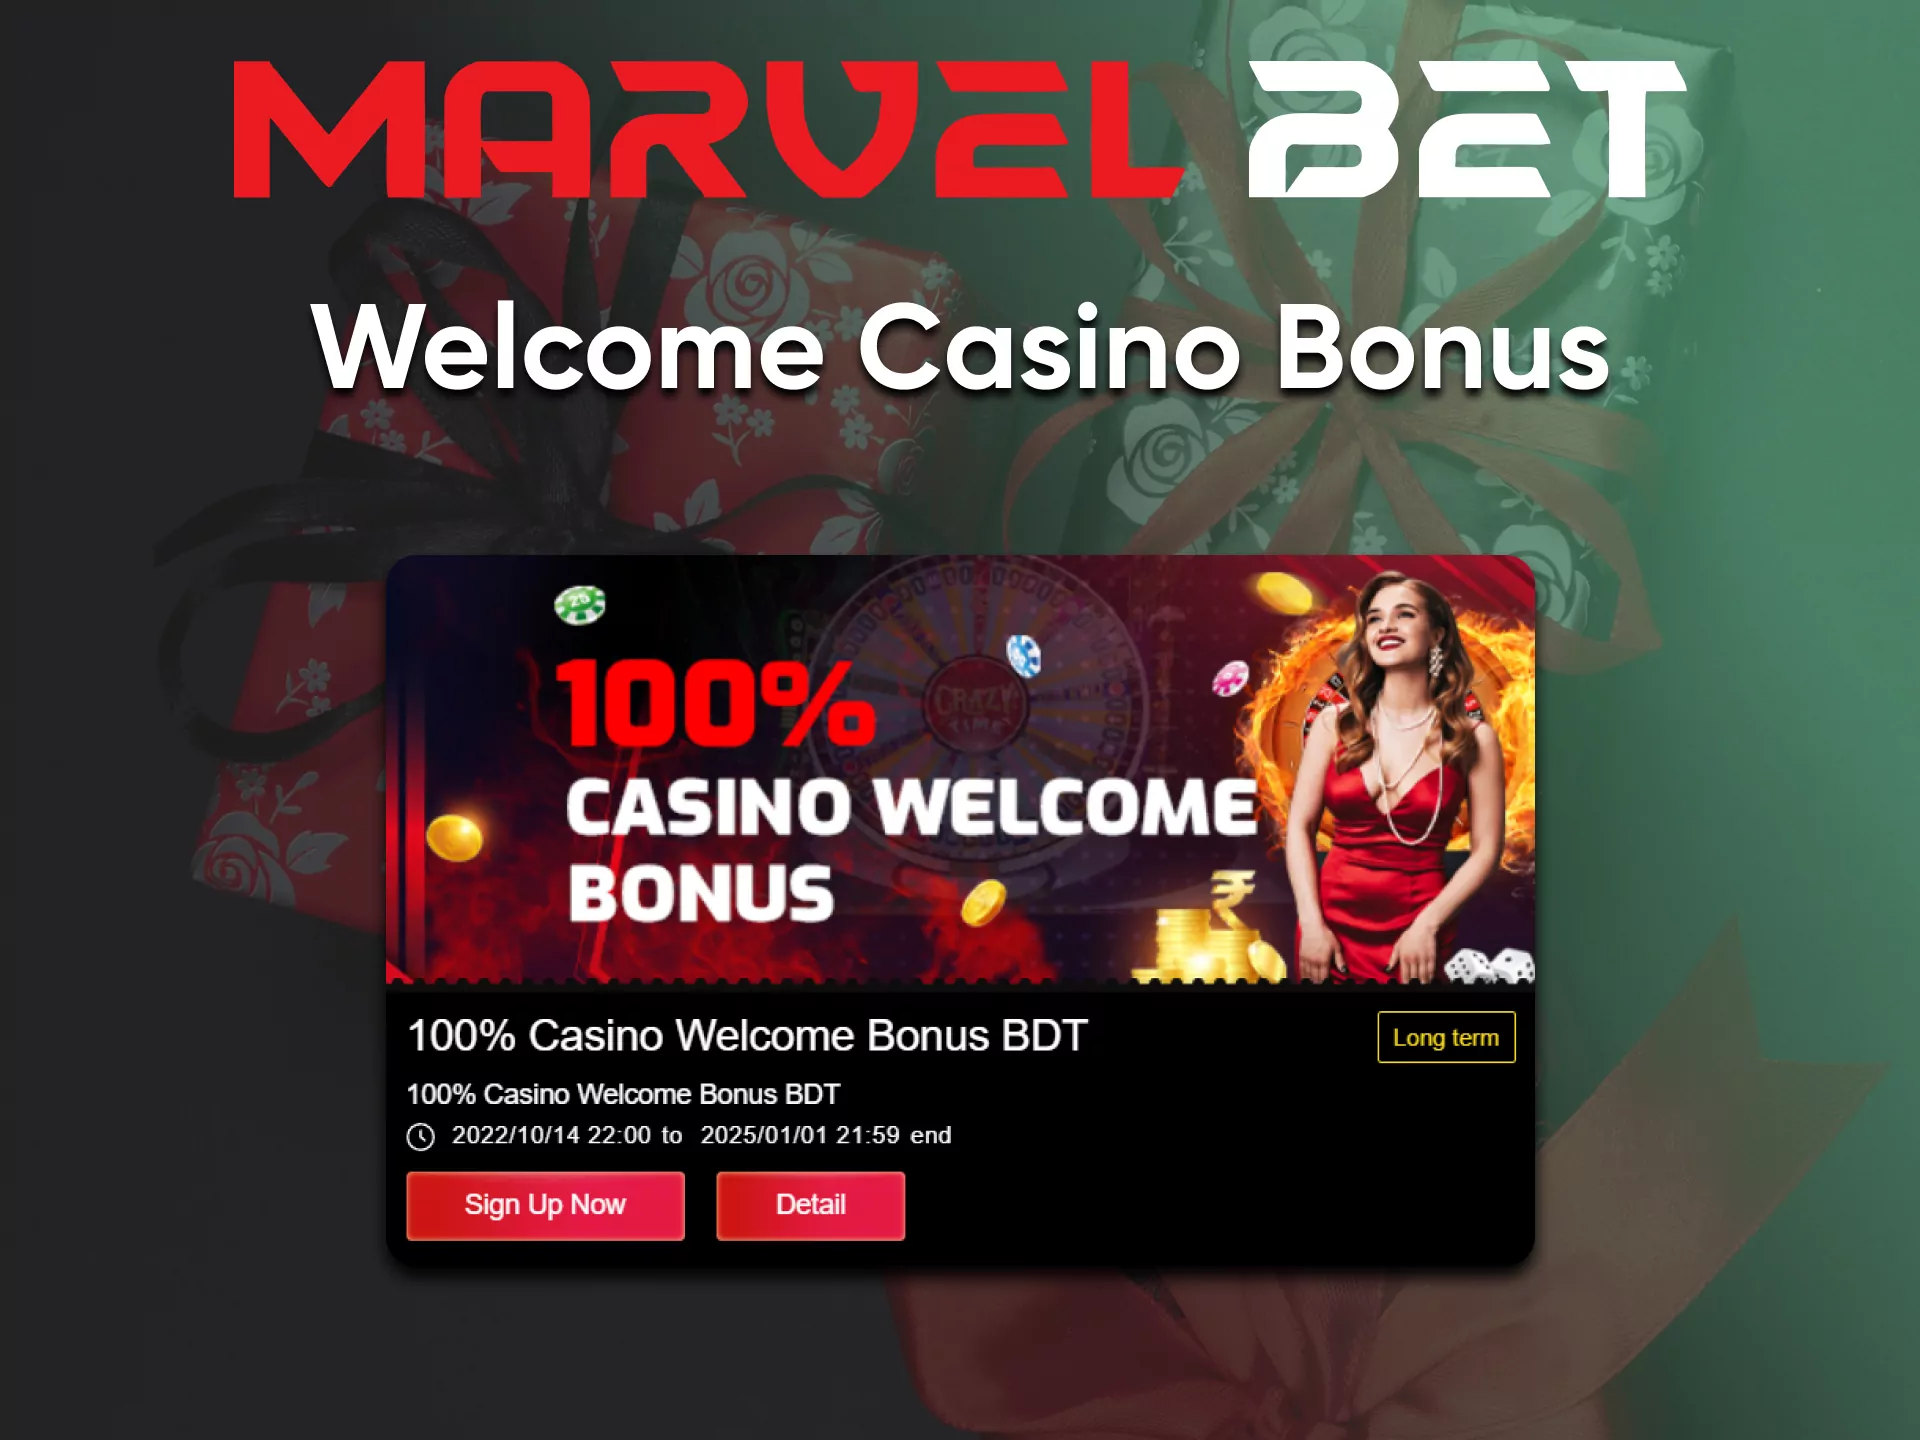 Deposit funds and get a bonus from Marvelbet.